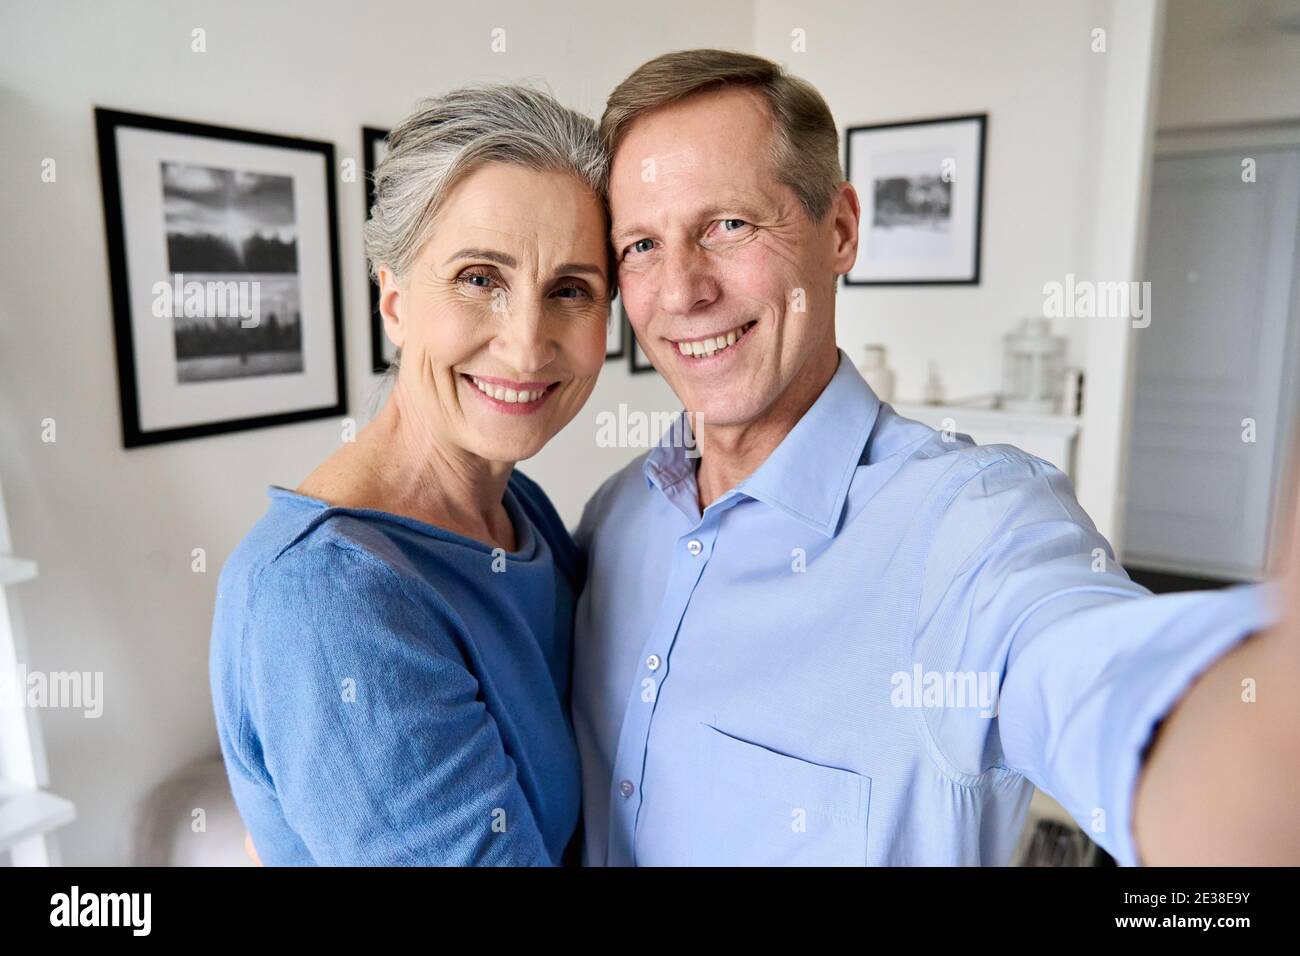 Happy senior couple looking at camera taking selfie portrait, camera view. Stock Photo